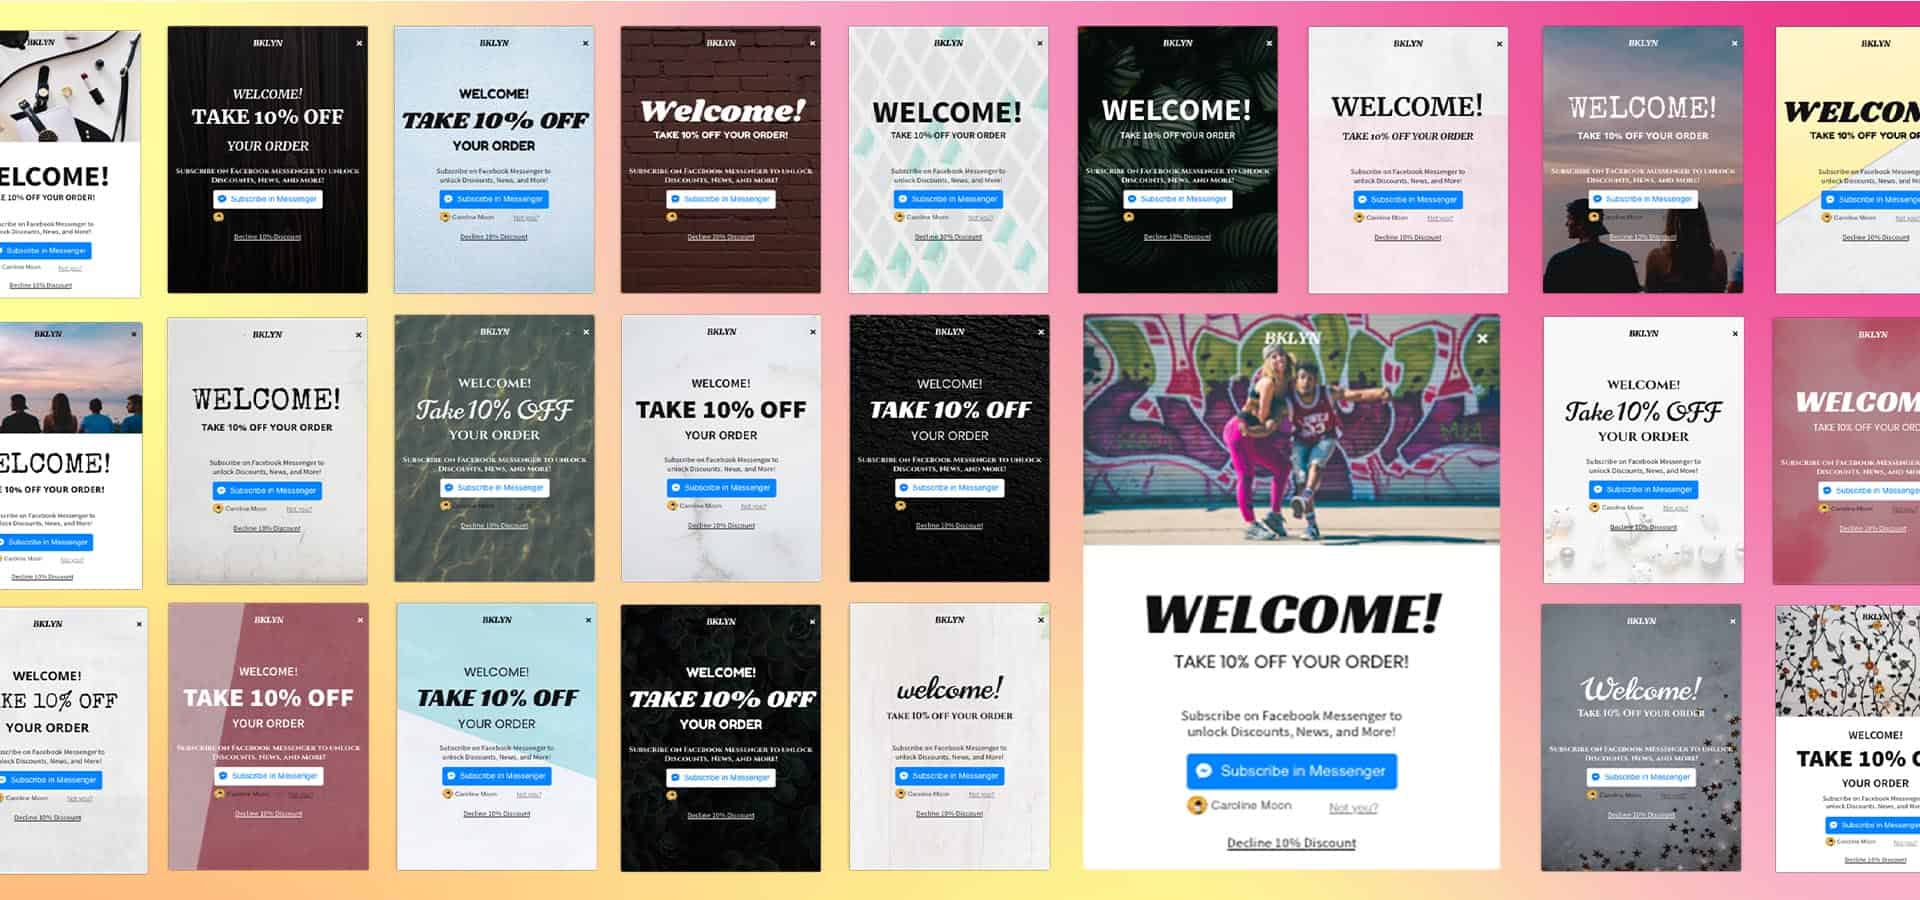 A grid of flyout overlays is layed on a warm, gradient background. They are all designed with different backgrounds and typeface choices, but they all say "Welcome! Take 10% Off Your Order". One overlay is twice as large as the rest, but it does not disrupt the grid.